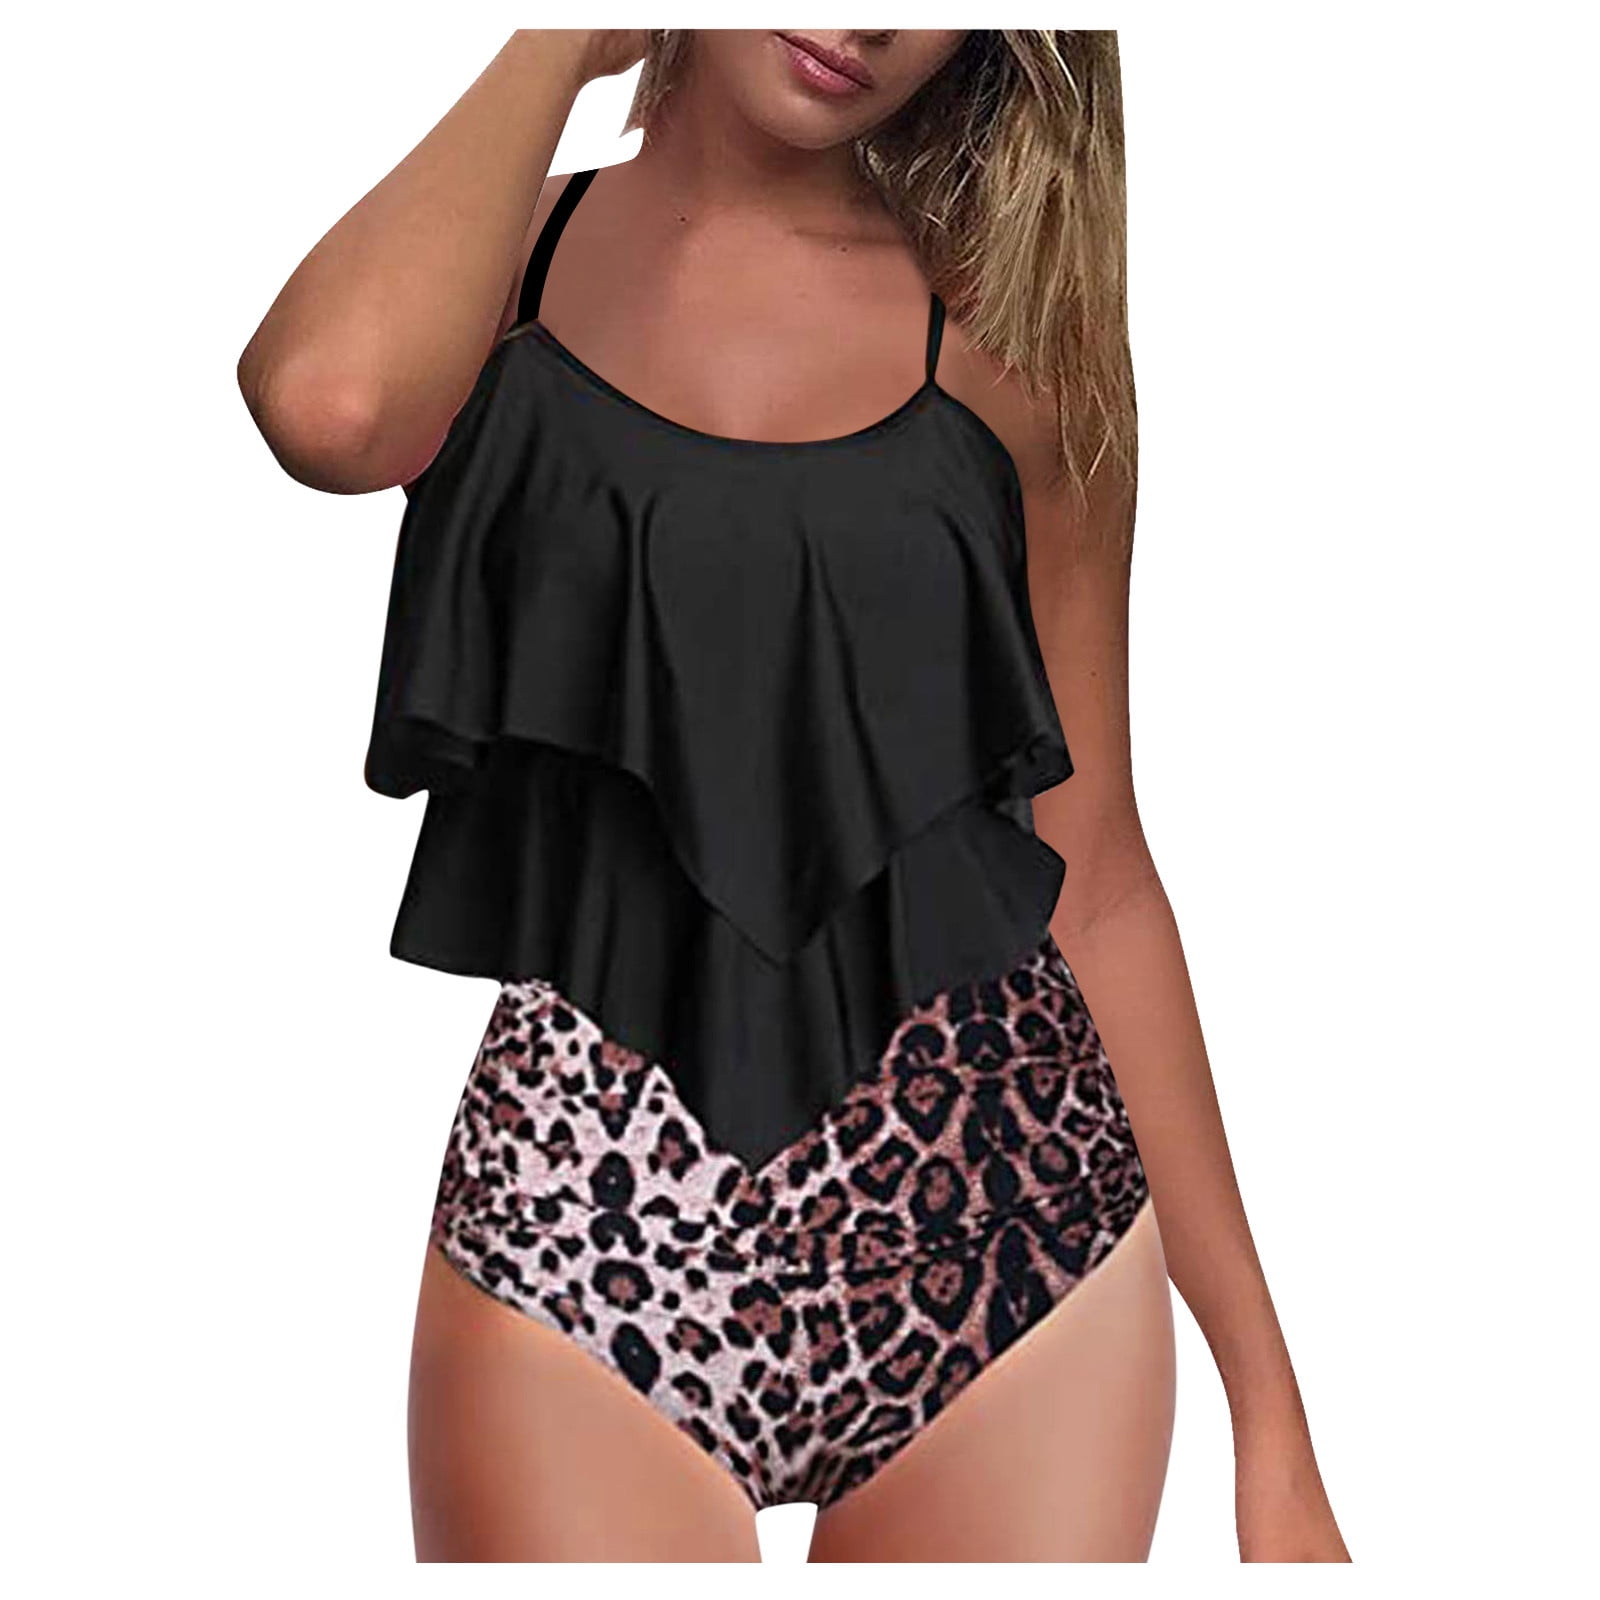 Bikini Swimsuit for Women High Waisted Swimsuits Tummy Control Two Piece Tankini Ruffled Top with Swim Bottom Bathing Suits 